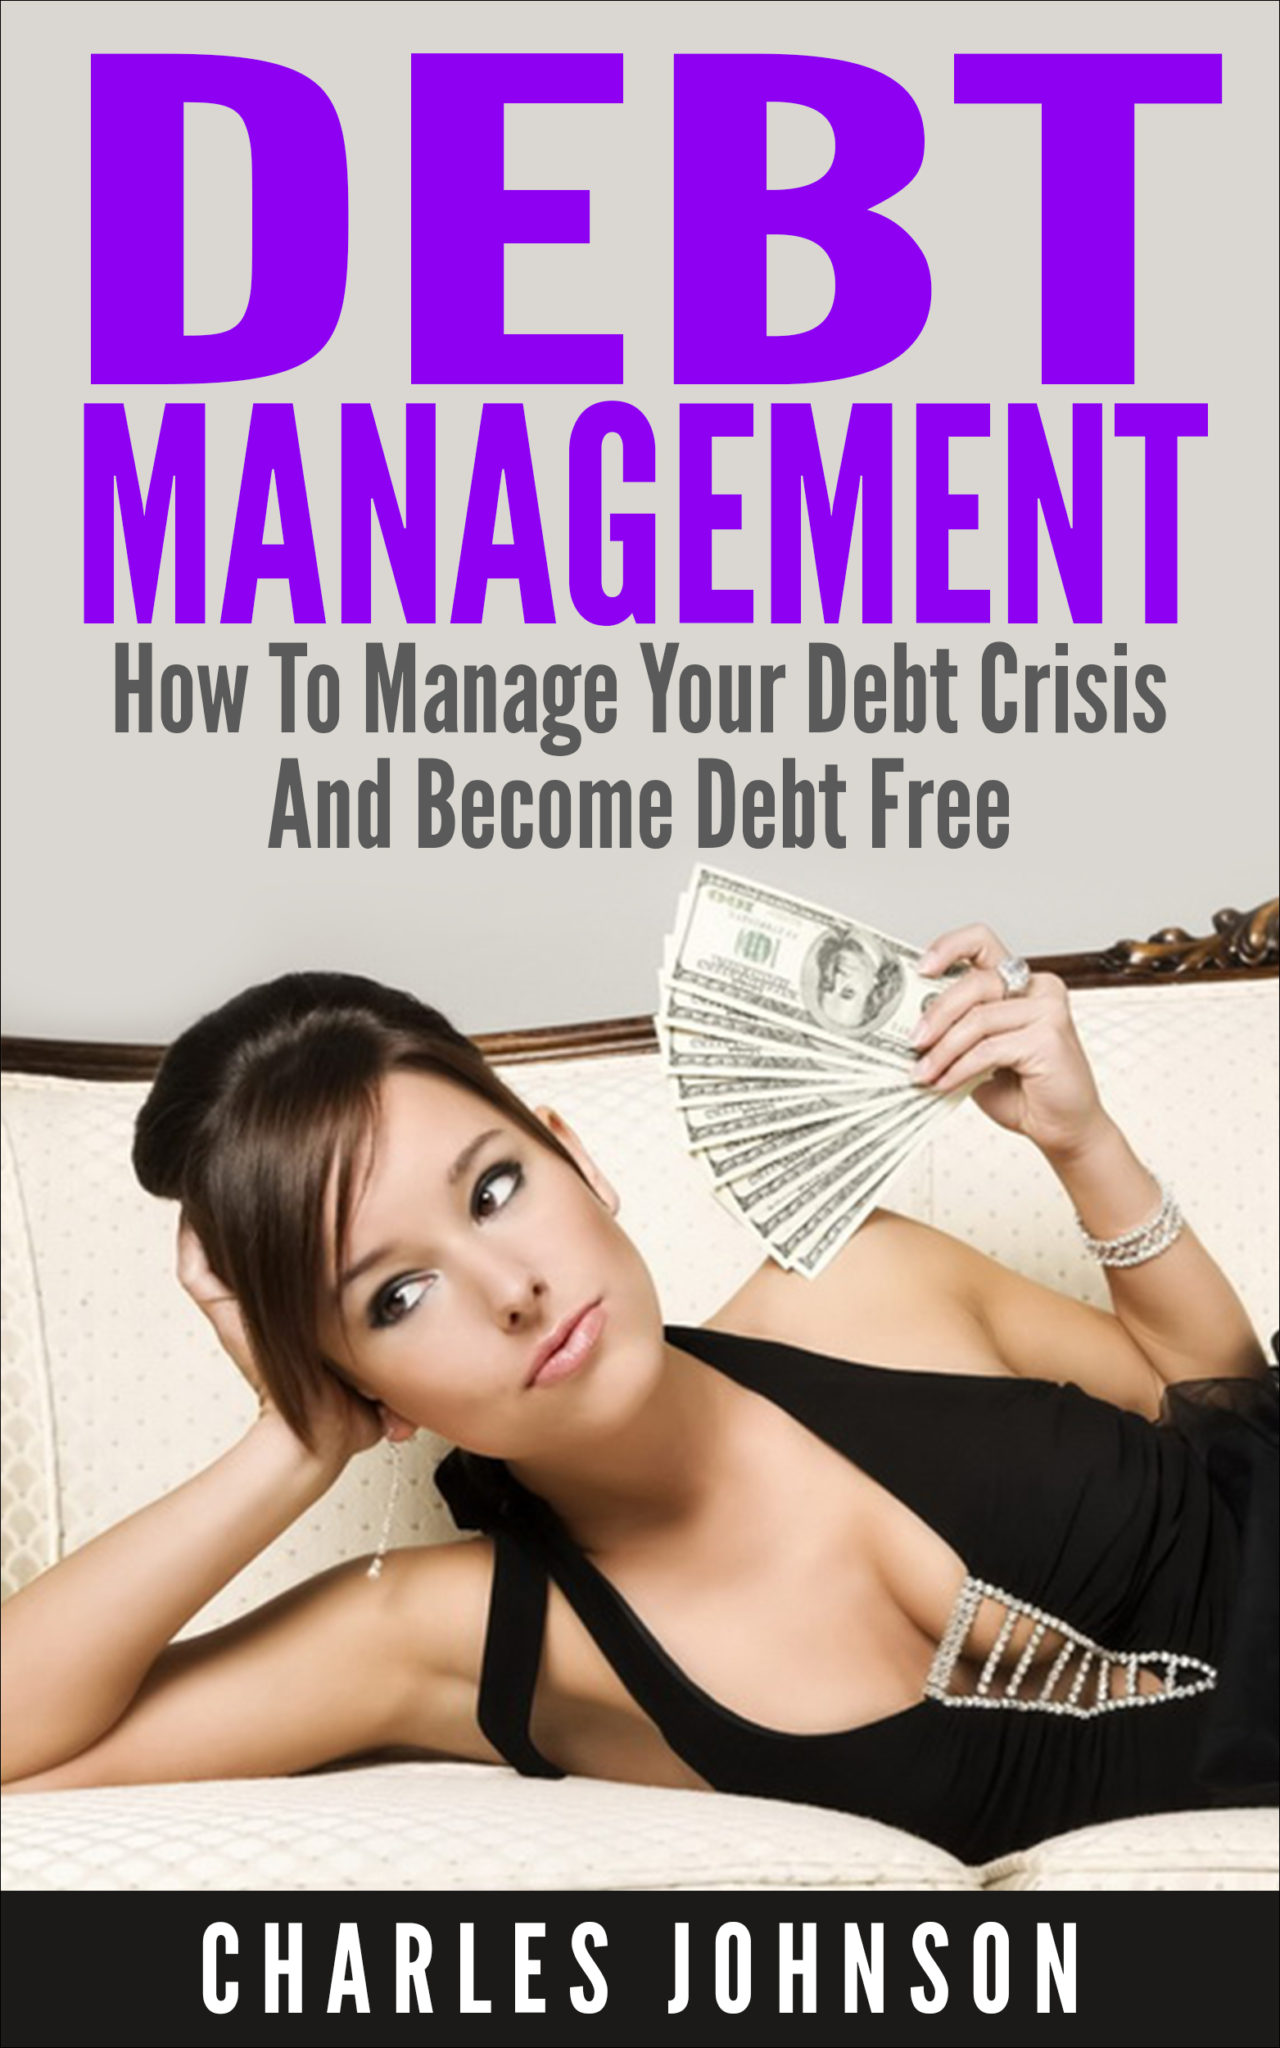 Debt Management: How to Manage Your Debt Crisis And Become Debt Free by Charles Johnson